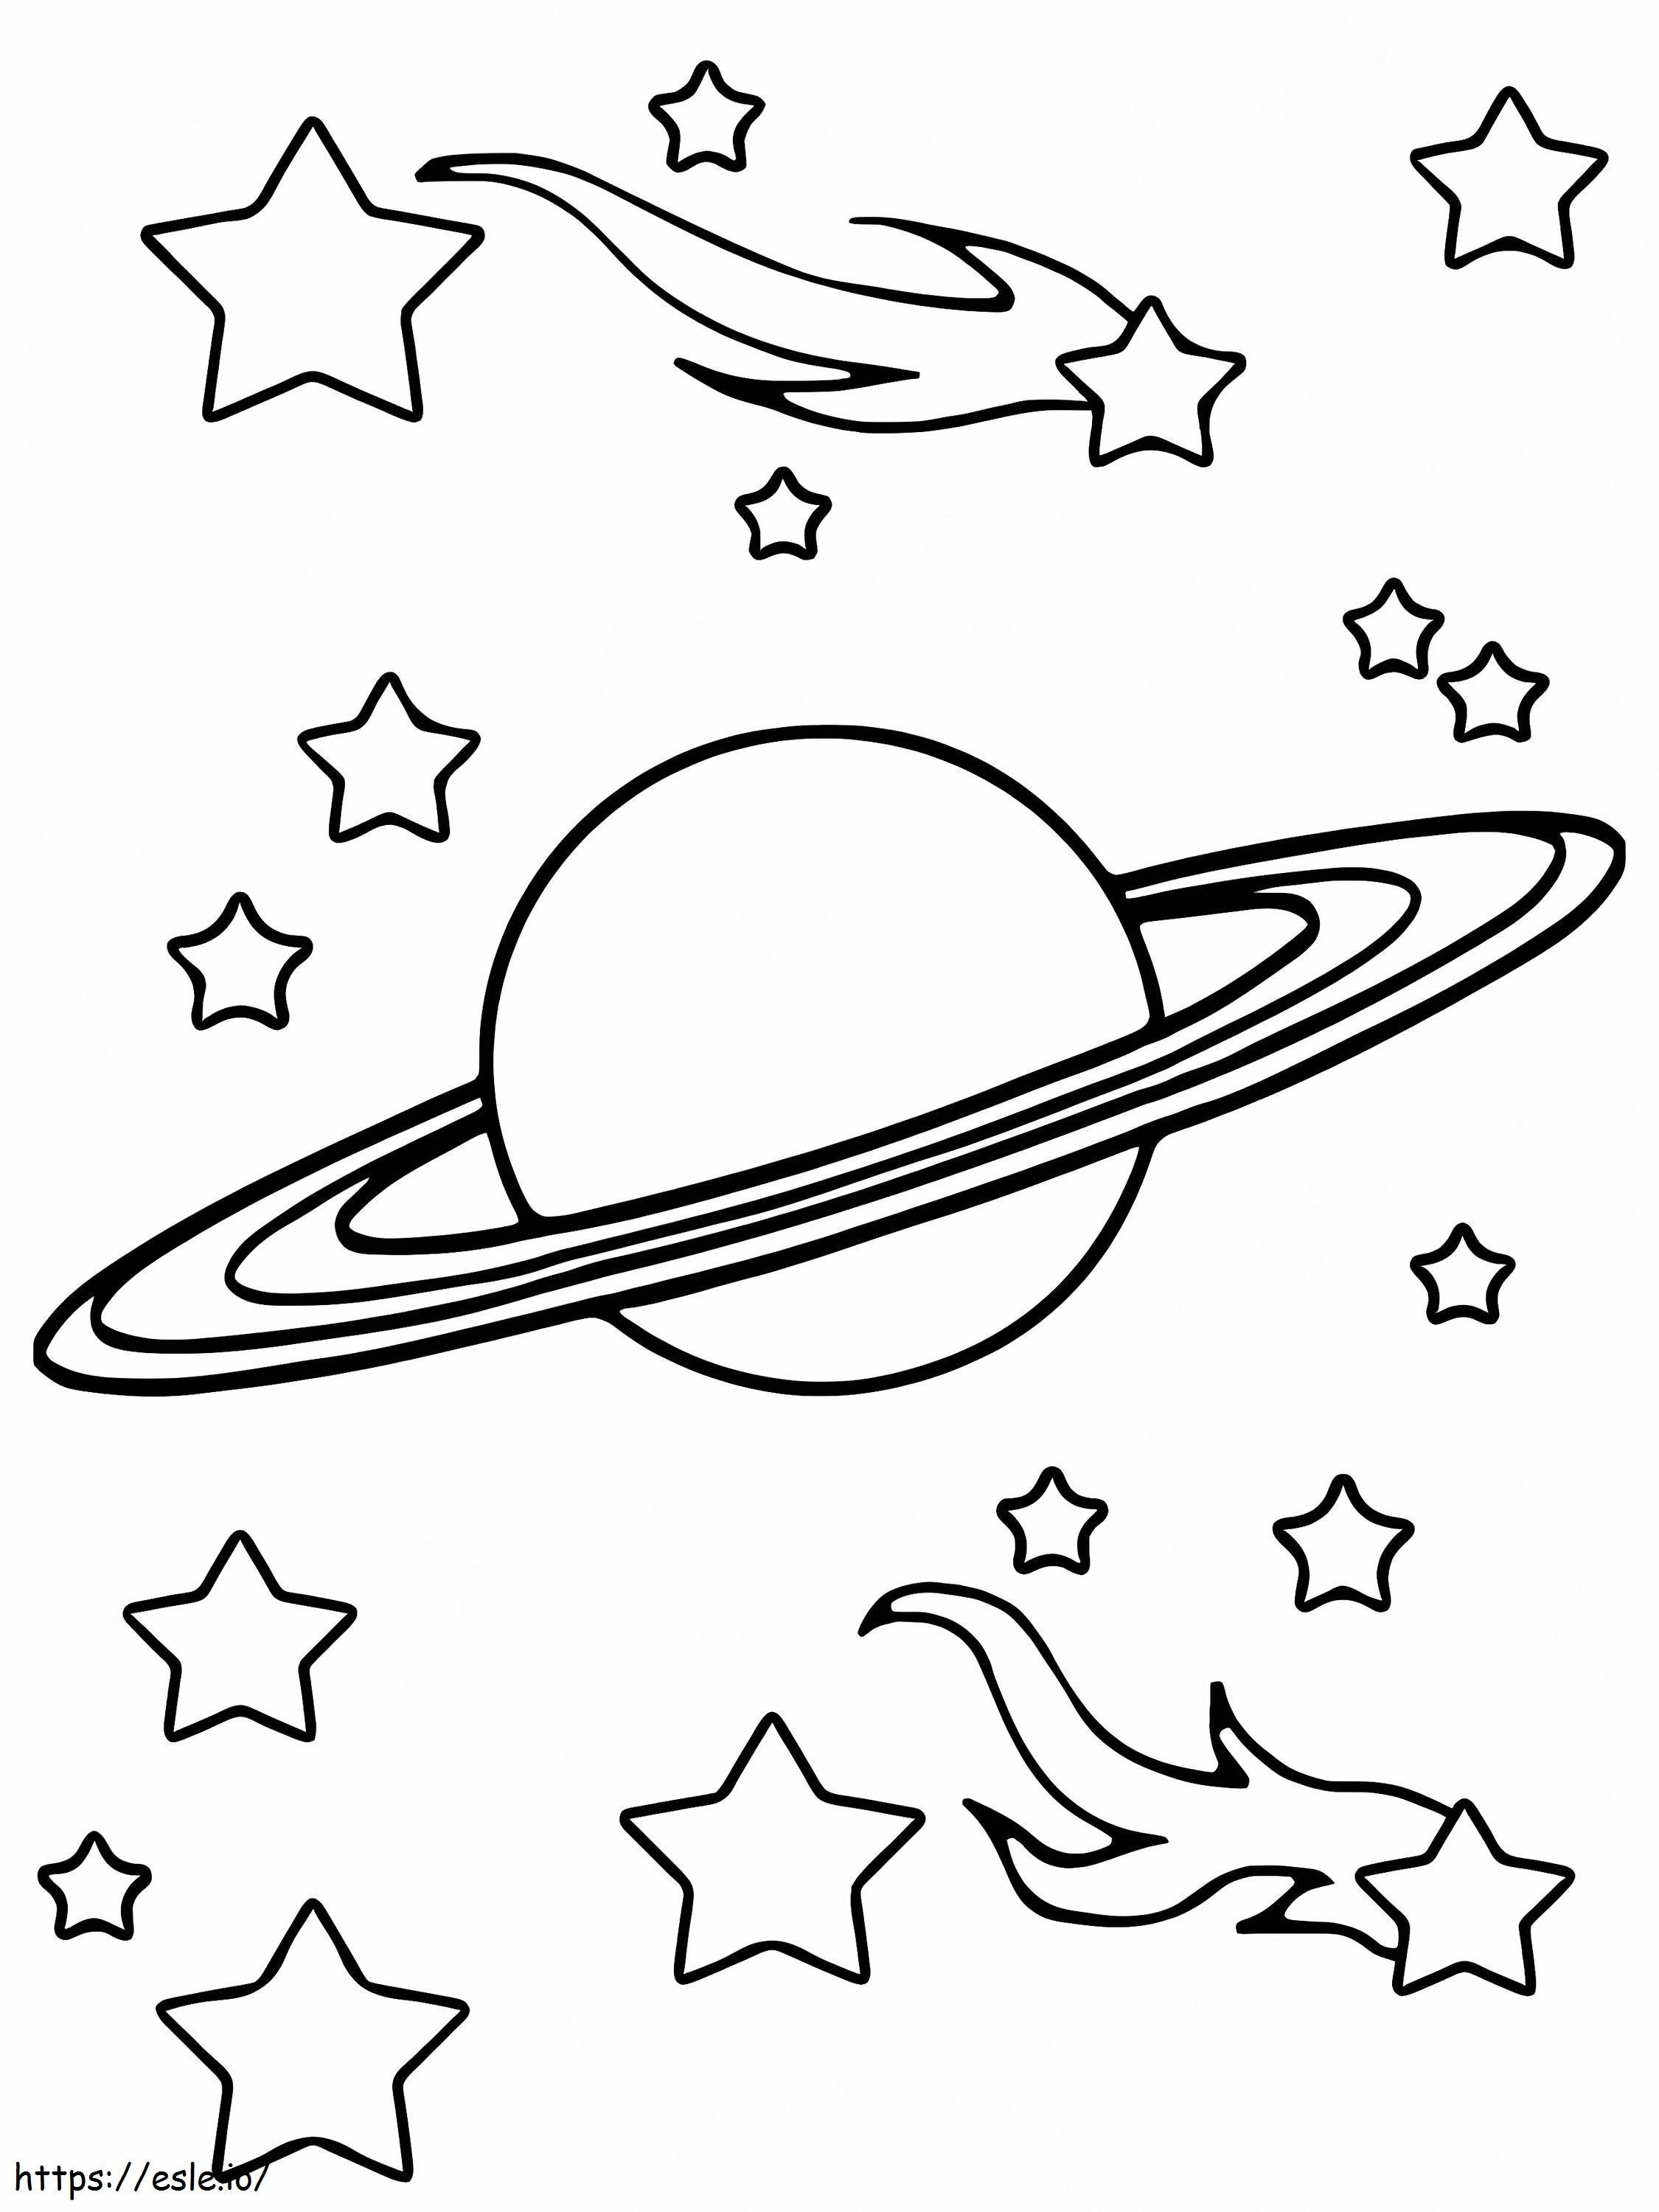 Saturn In Space coloring page